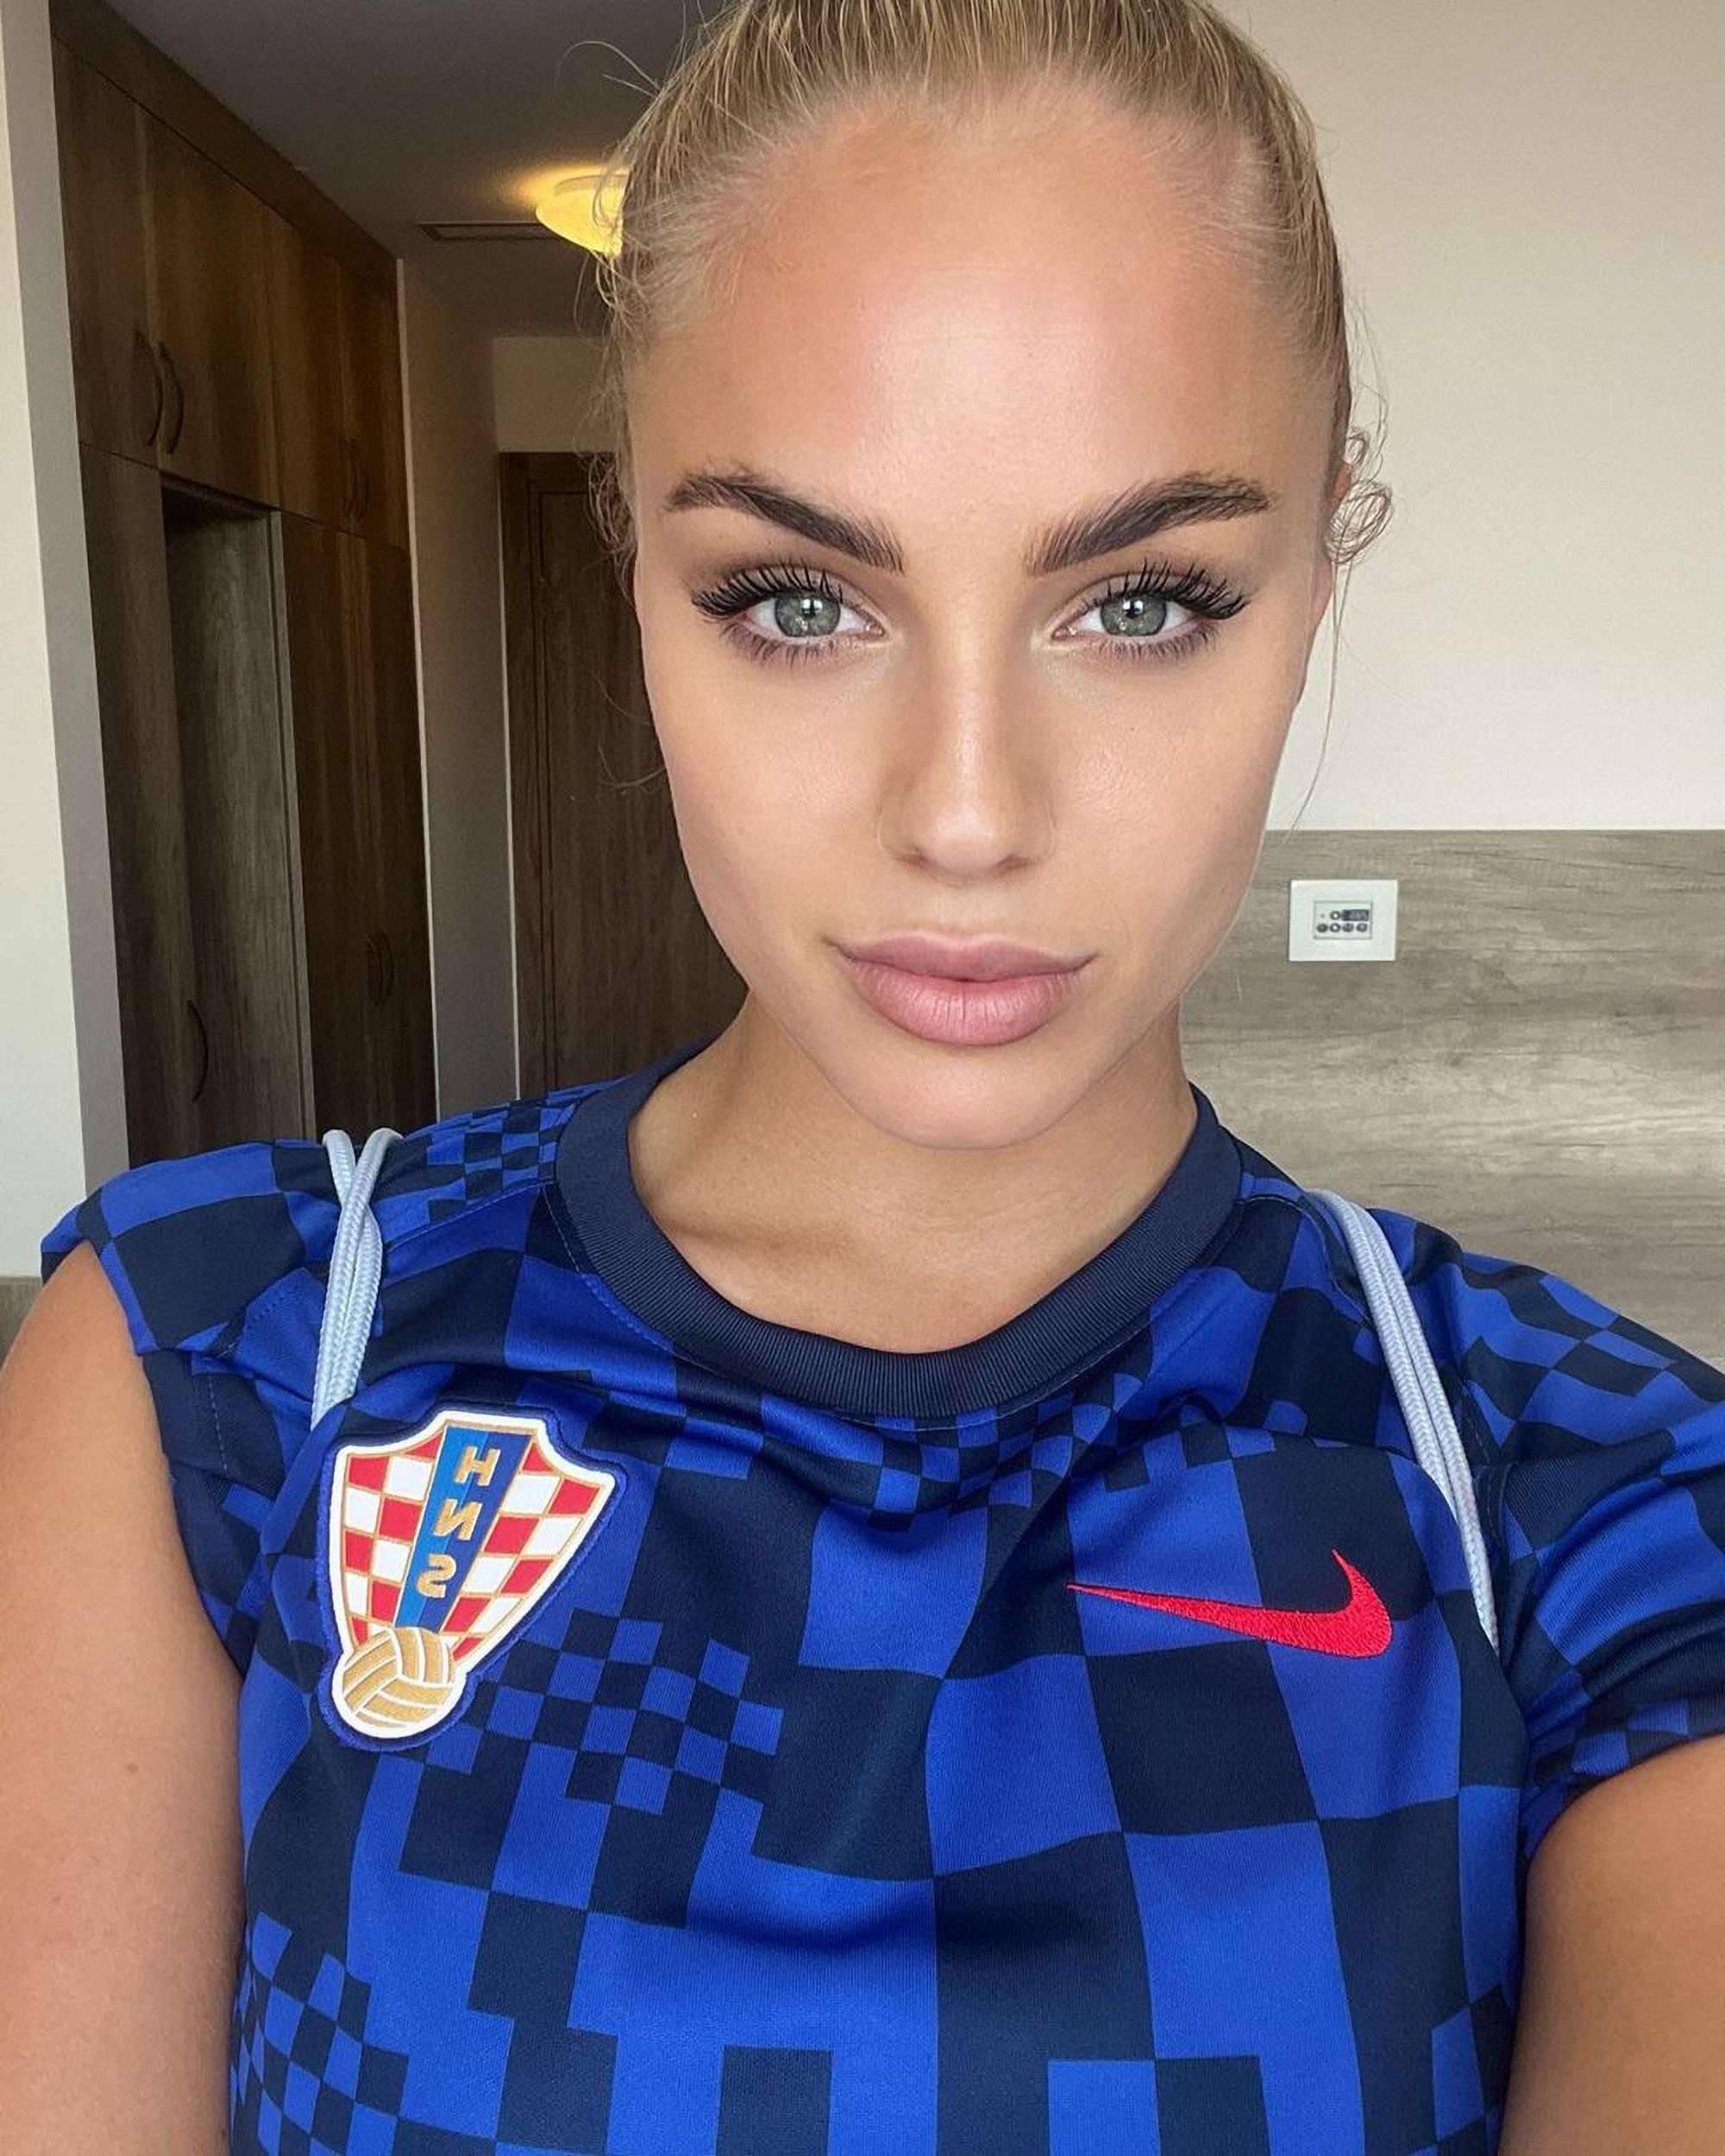 Read more about the article WORLD’S FINEST: World’s Most Beautiful Footballer Says She Wants To Move To England